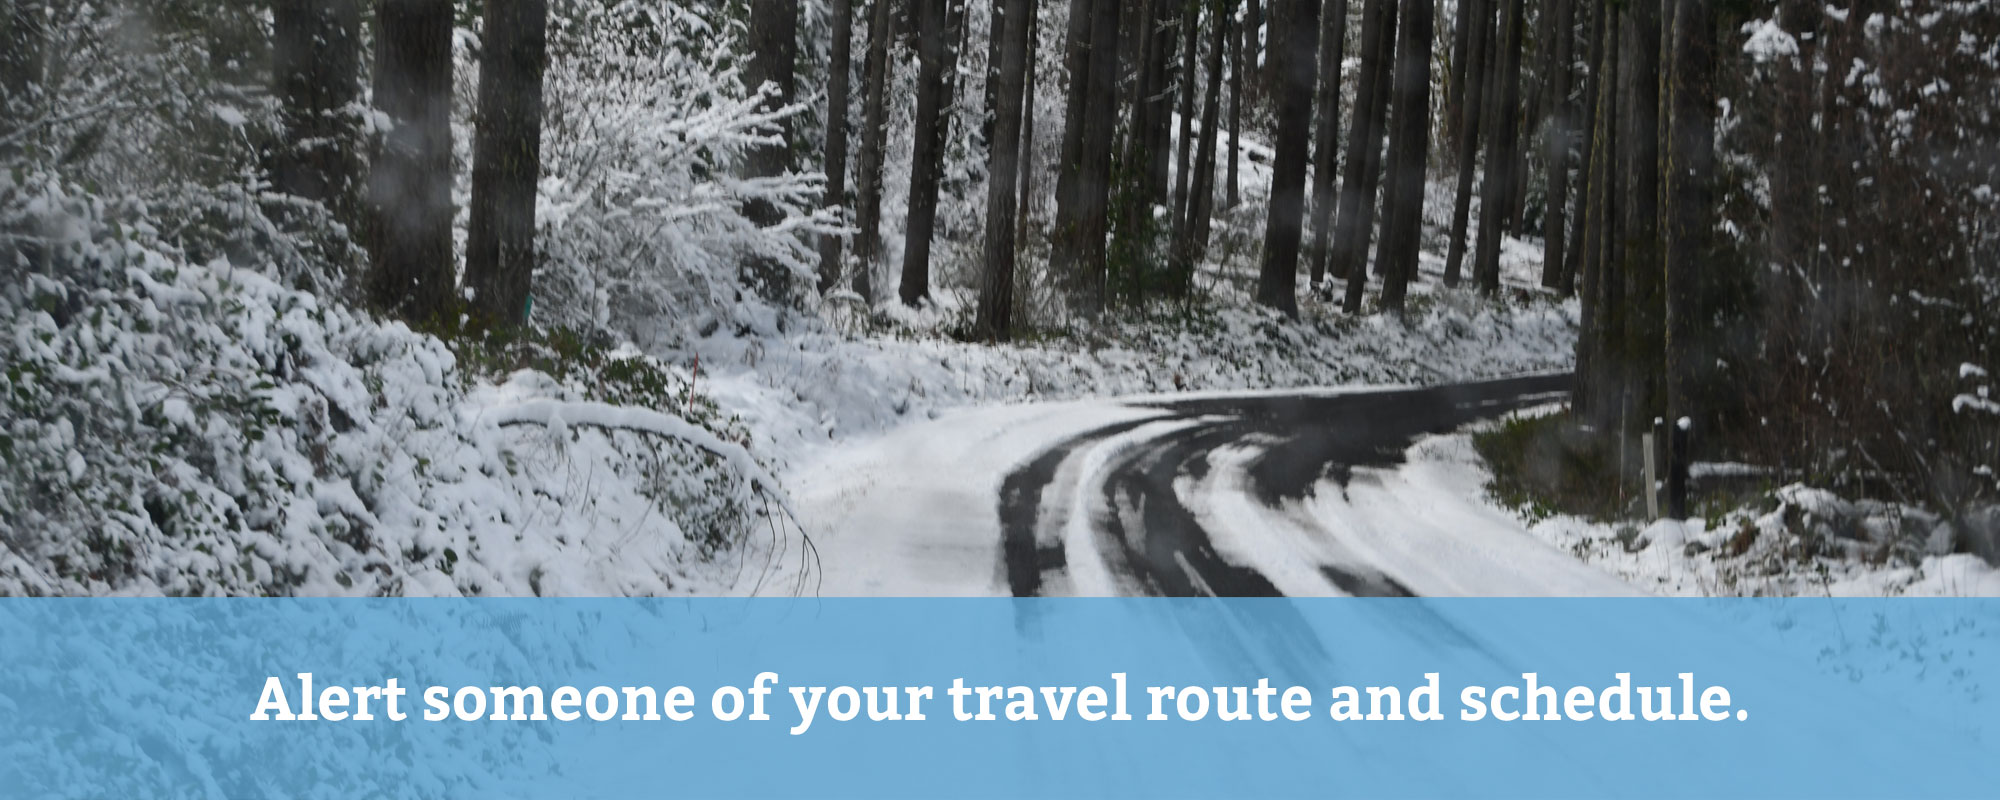 Alert someone of your travel route and schedule.